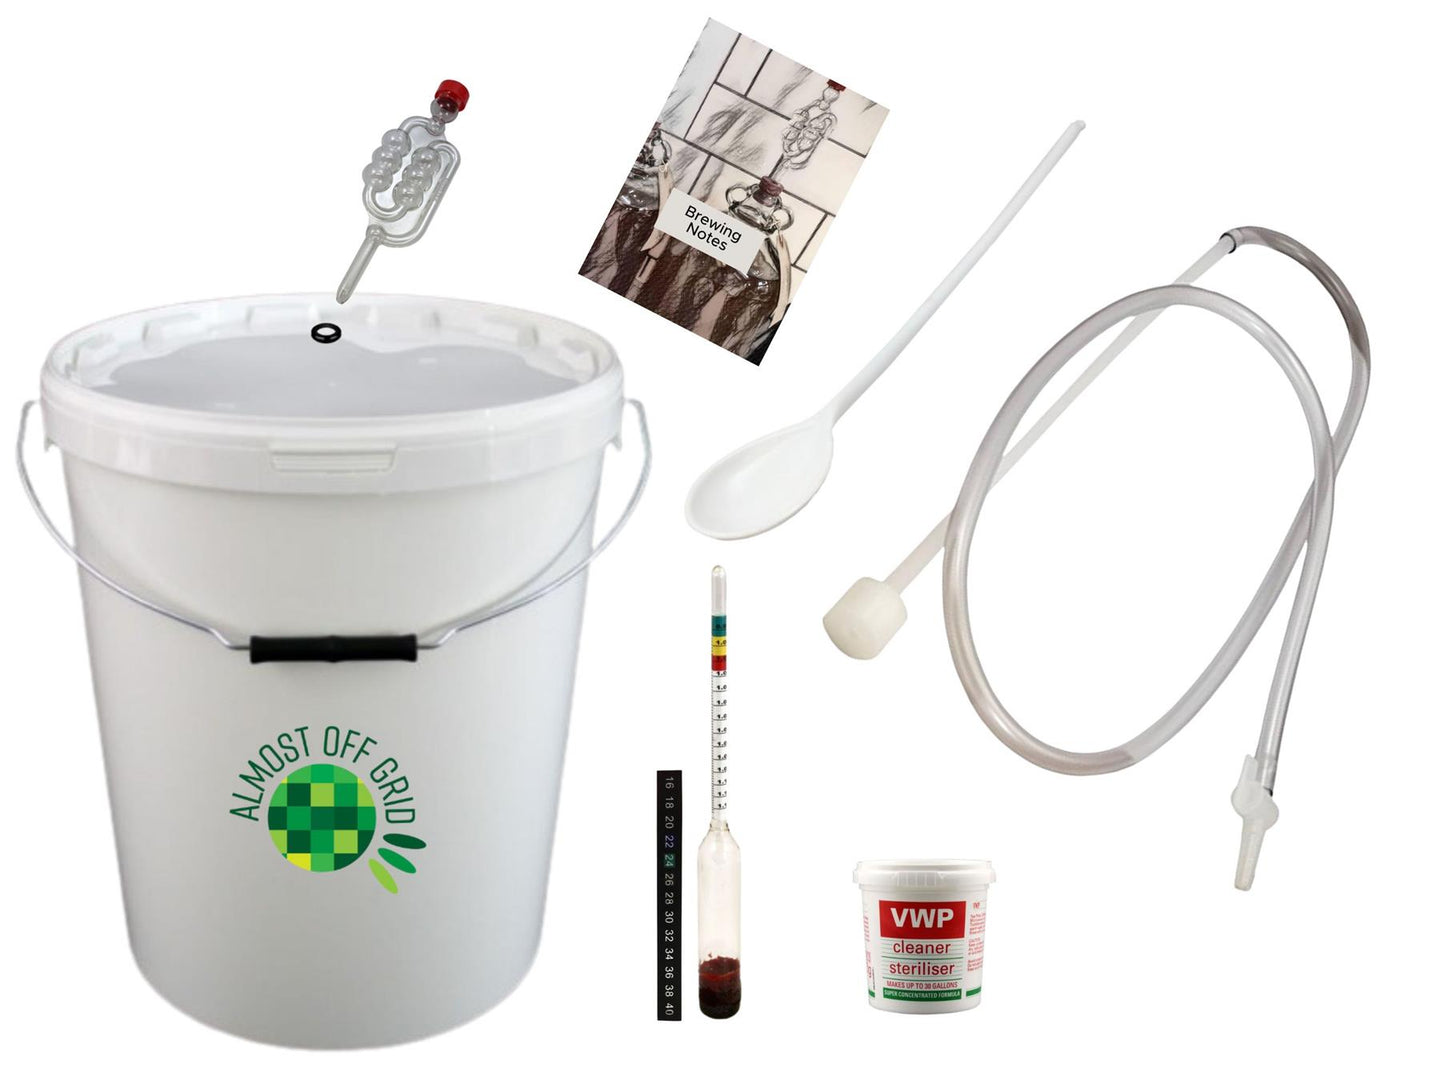 Almost Off Grid 25 Litre Beer and Wine Making Starter Kit with Notebook - Almost Off Grid